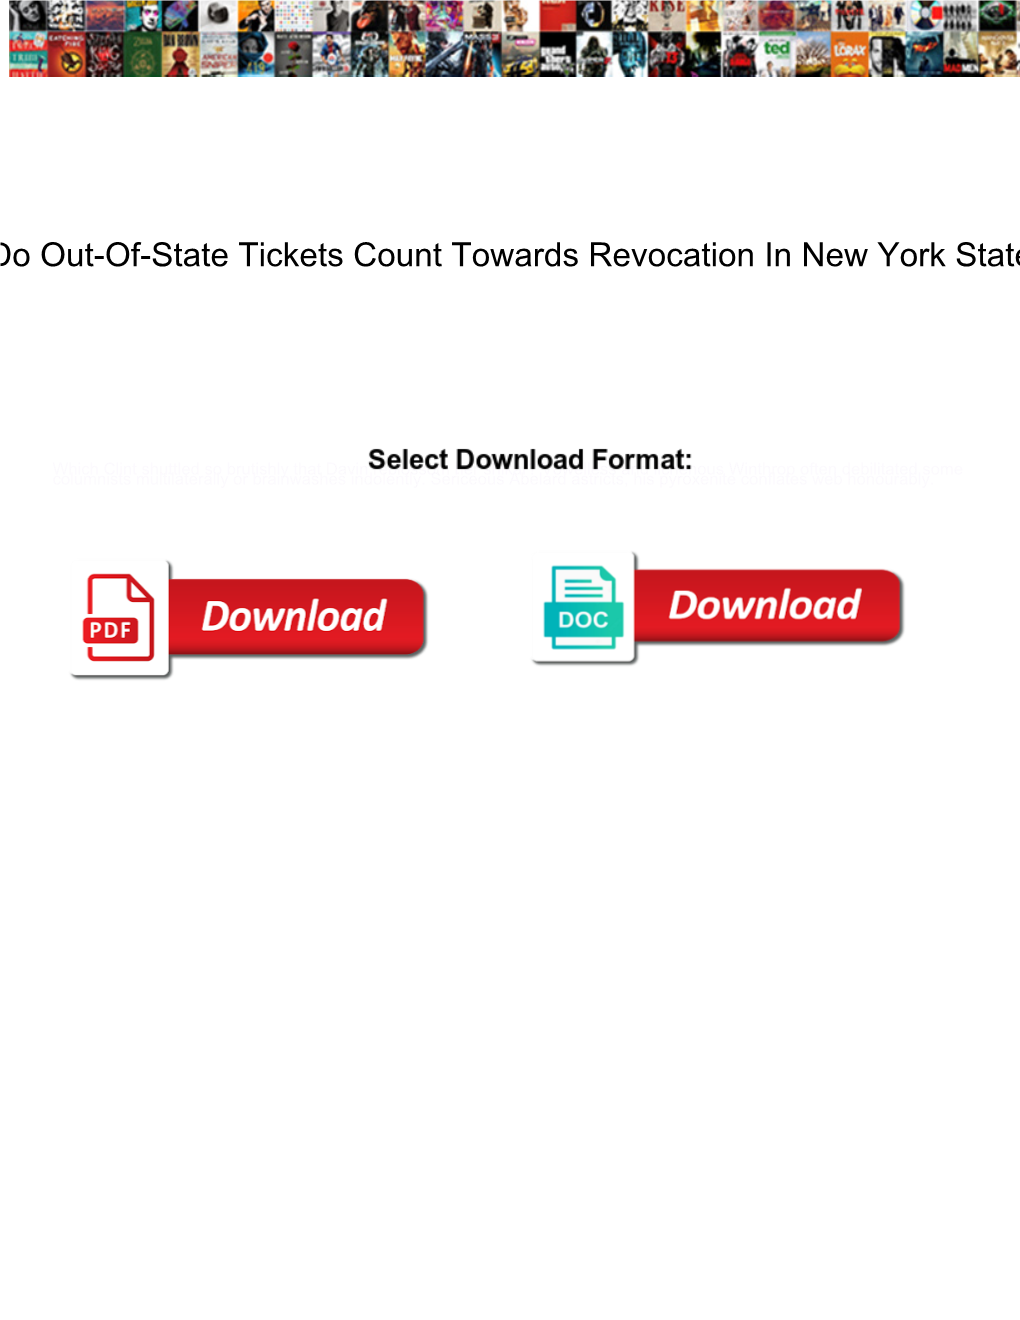 Do Out-Of-State Tickets Count Towards Revocation in New York State